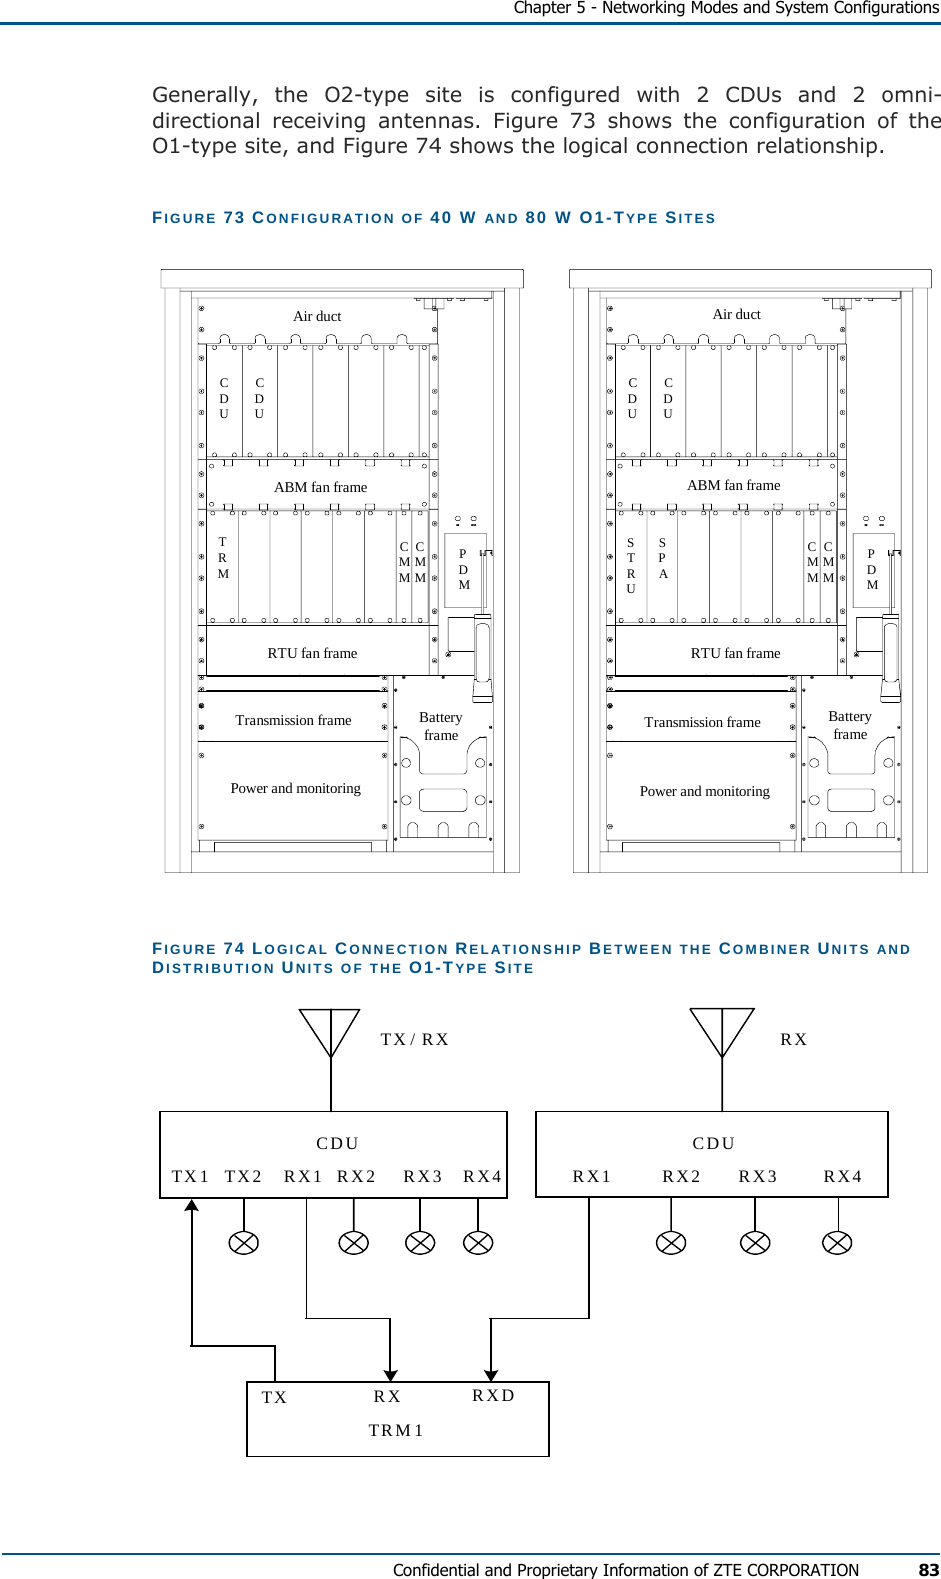    Chapter 5 - Networking Modes and System Configurations Confidential and Proprietary Information of ZTE CORPORATION 83 Generally, the O2-type site is configured with 2 CDUs and 2 omni-directional receiving antennas. Figure 73 shows the configuration of the O1-type site, and Figure 74 shows the logical connection relationship. FIGURE 73 CONFIGURATION OF 40 W AND 80 W O1-TYPE SITES CDUSTRUSPACMMCMMPDMCDUCDUPDMCMMCMMTRMCDUAir duct Air ductABM fan frame ABM fan frameRTU fan frame RTU fan frameBatteryframePower and monitoringTransmission frame BatteryframePower and monitoringTransmission frame FIGURE 74 LOGICAL CONNECTION RELATIONSHIP BETWEEN THE COMBINER UNITS AND DISTRIBUTION UNITS OF THE O1-TYPE SITE CDUTX/ RXTRM1CDURXTX1 TX2 RX1 RX2 RX3 RX4 RX1 RX2 RX3 RX4TX RX RXD 